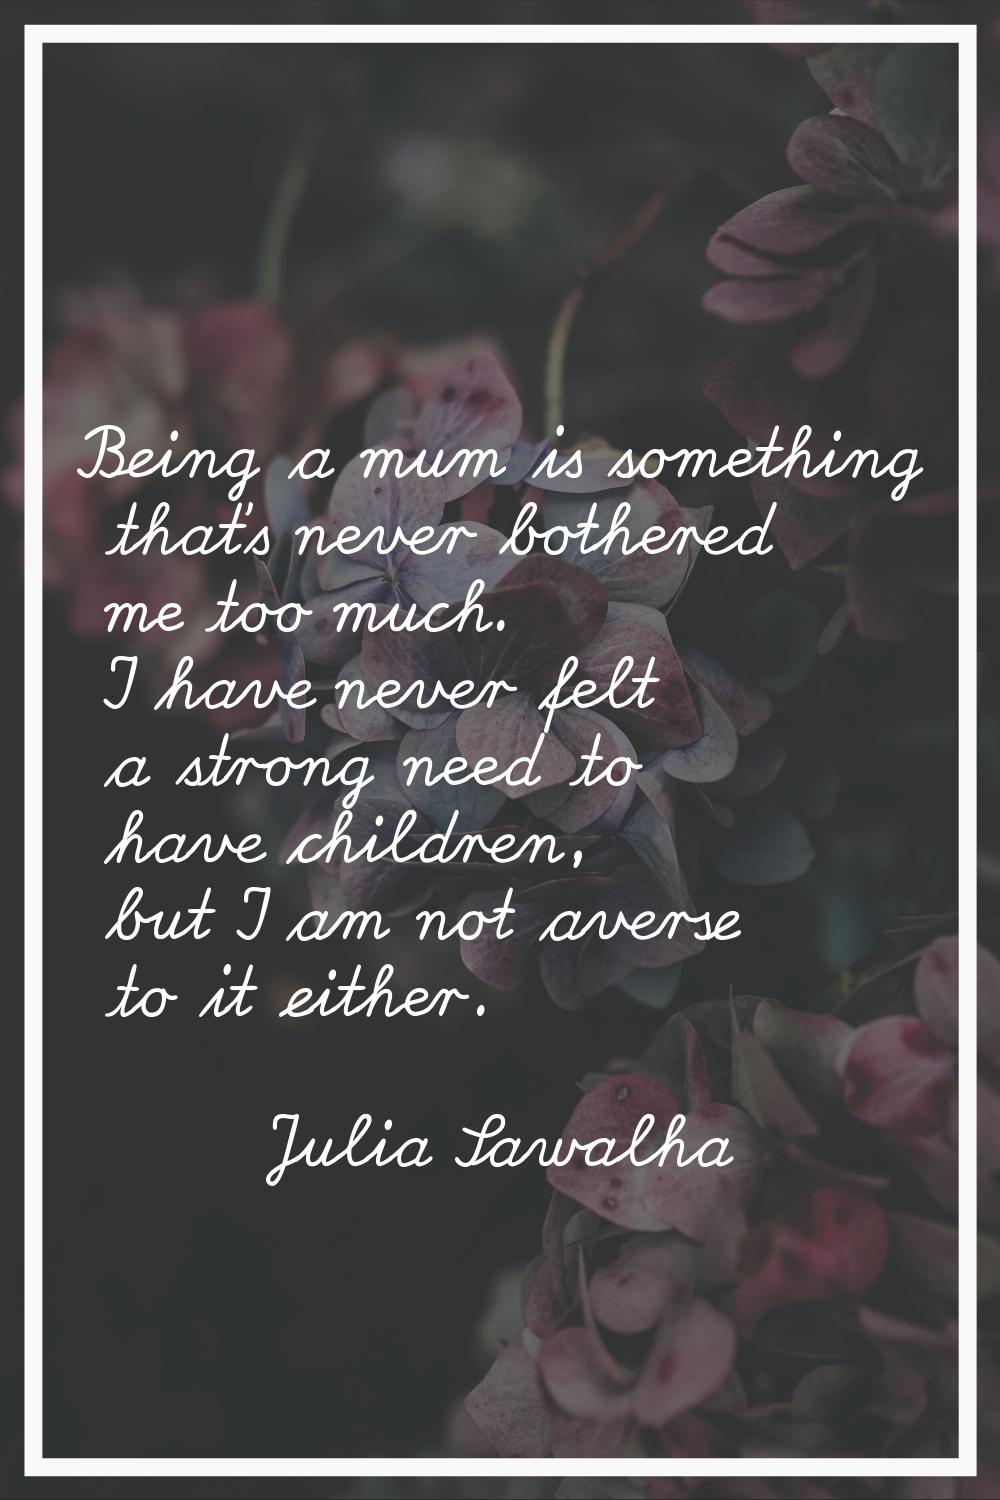 Being a mum is something that's never bothered me too much. I have never felt a strong need to have